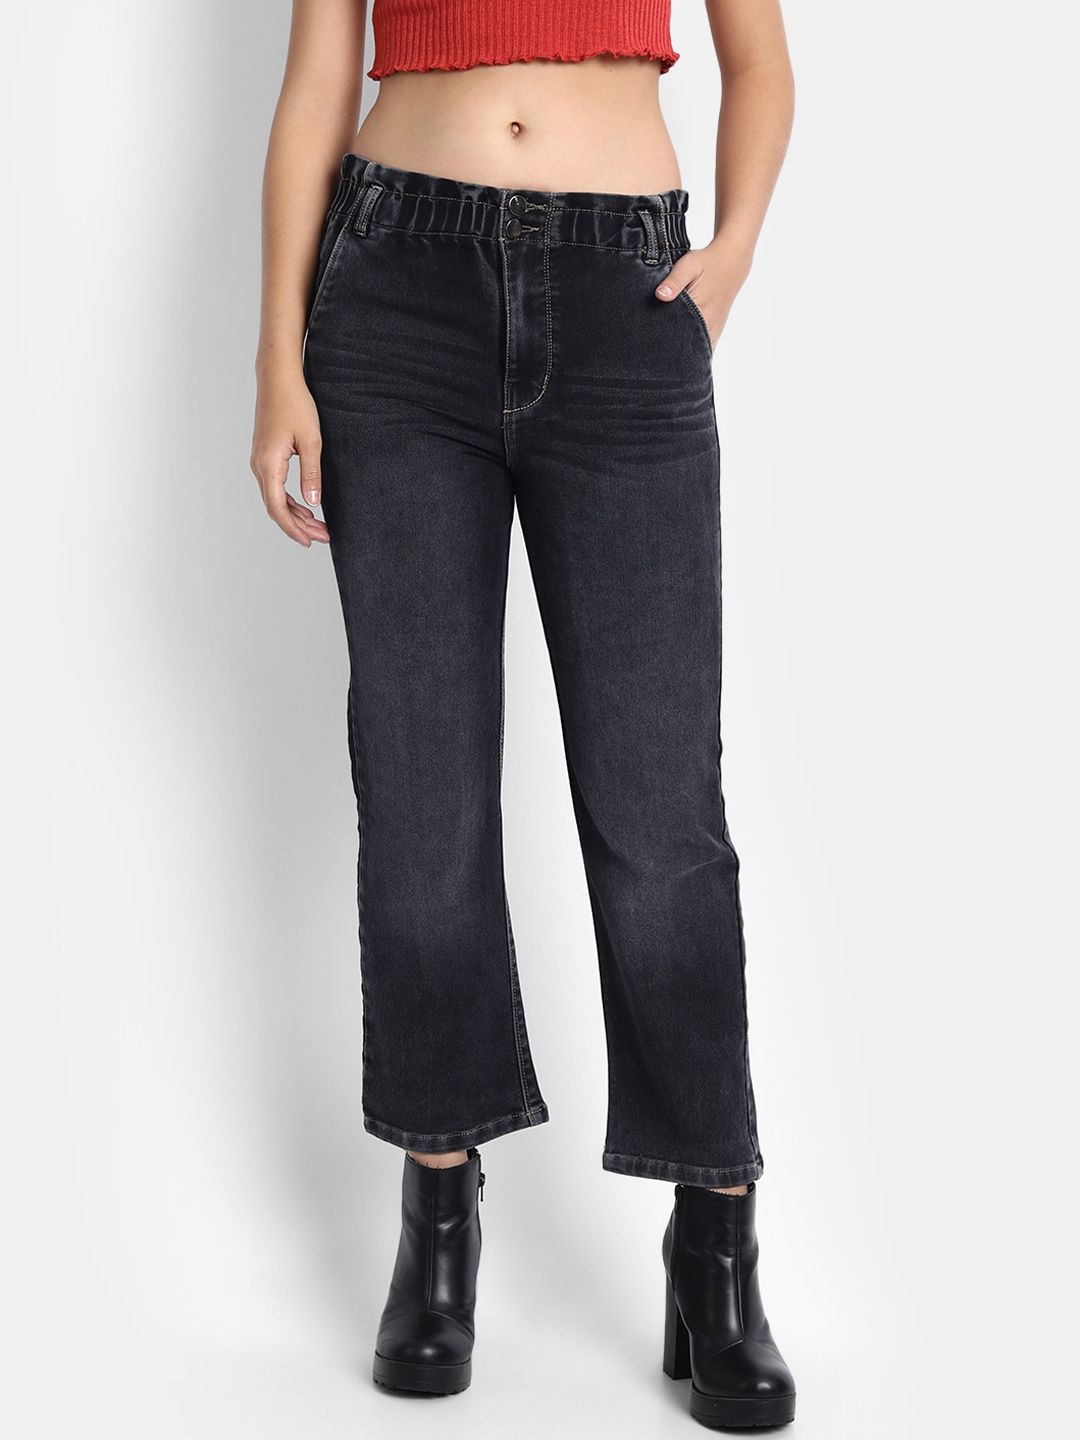 Next One Women Black High-Rise Light Fade Stretchable Jeans Price in India